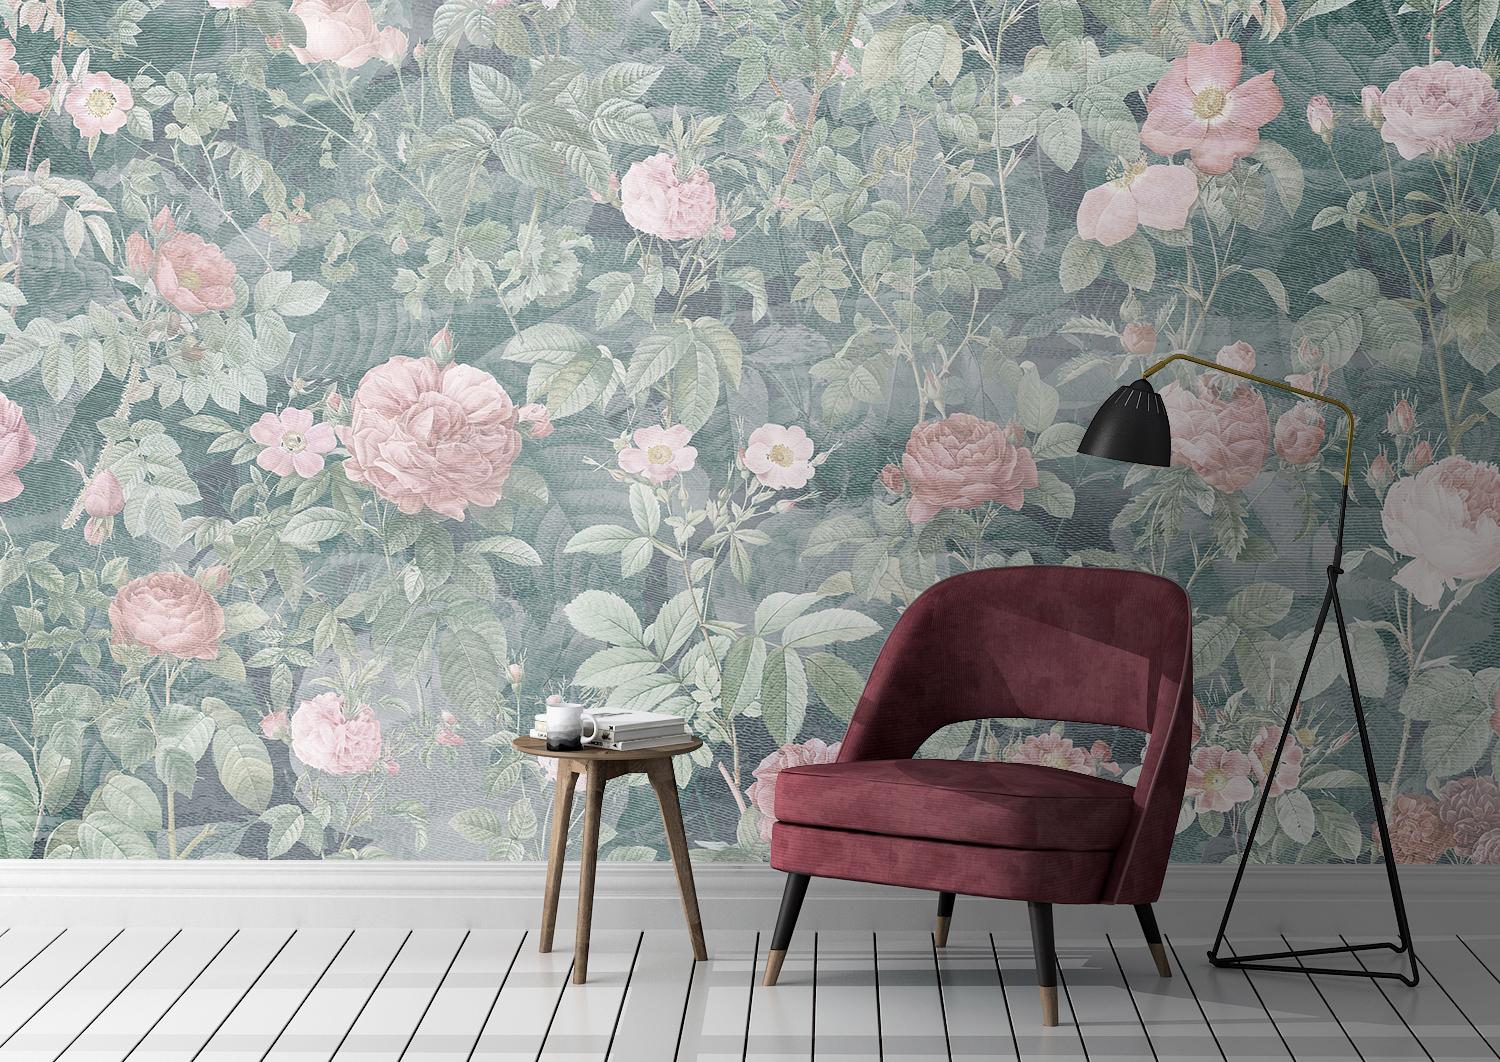 Modern Paeonia - Custom Mural Wallpaper (green and pink) For Sale